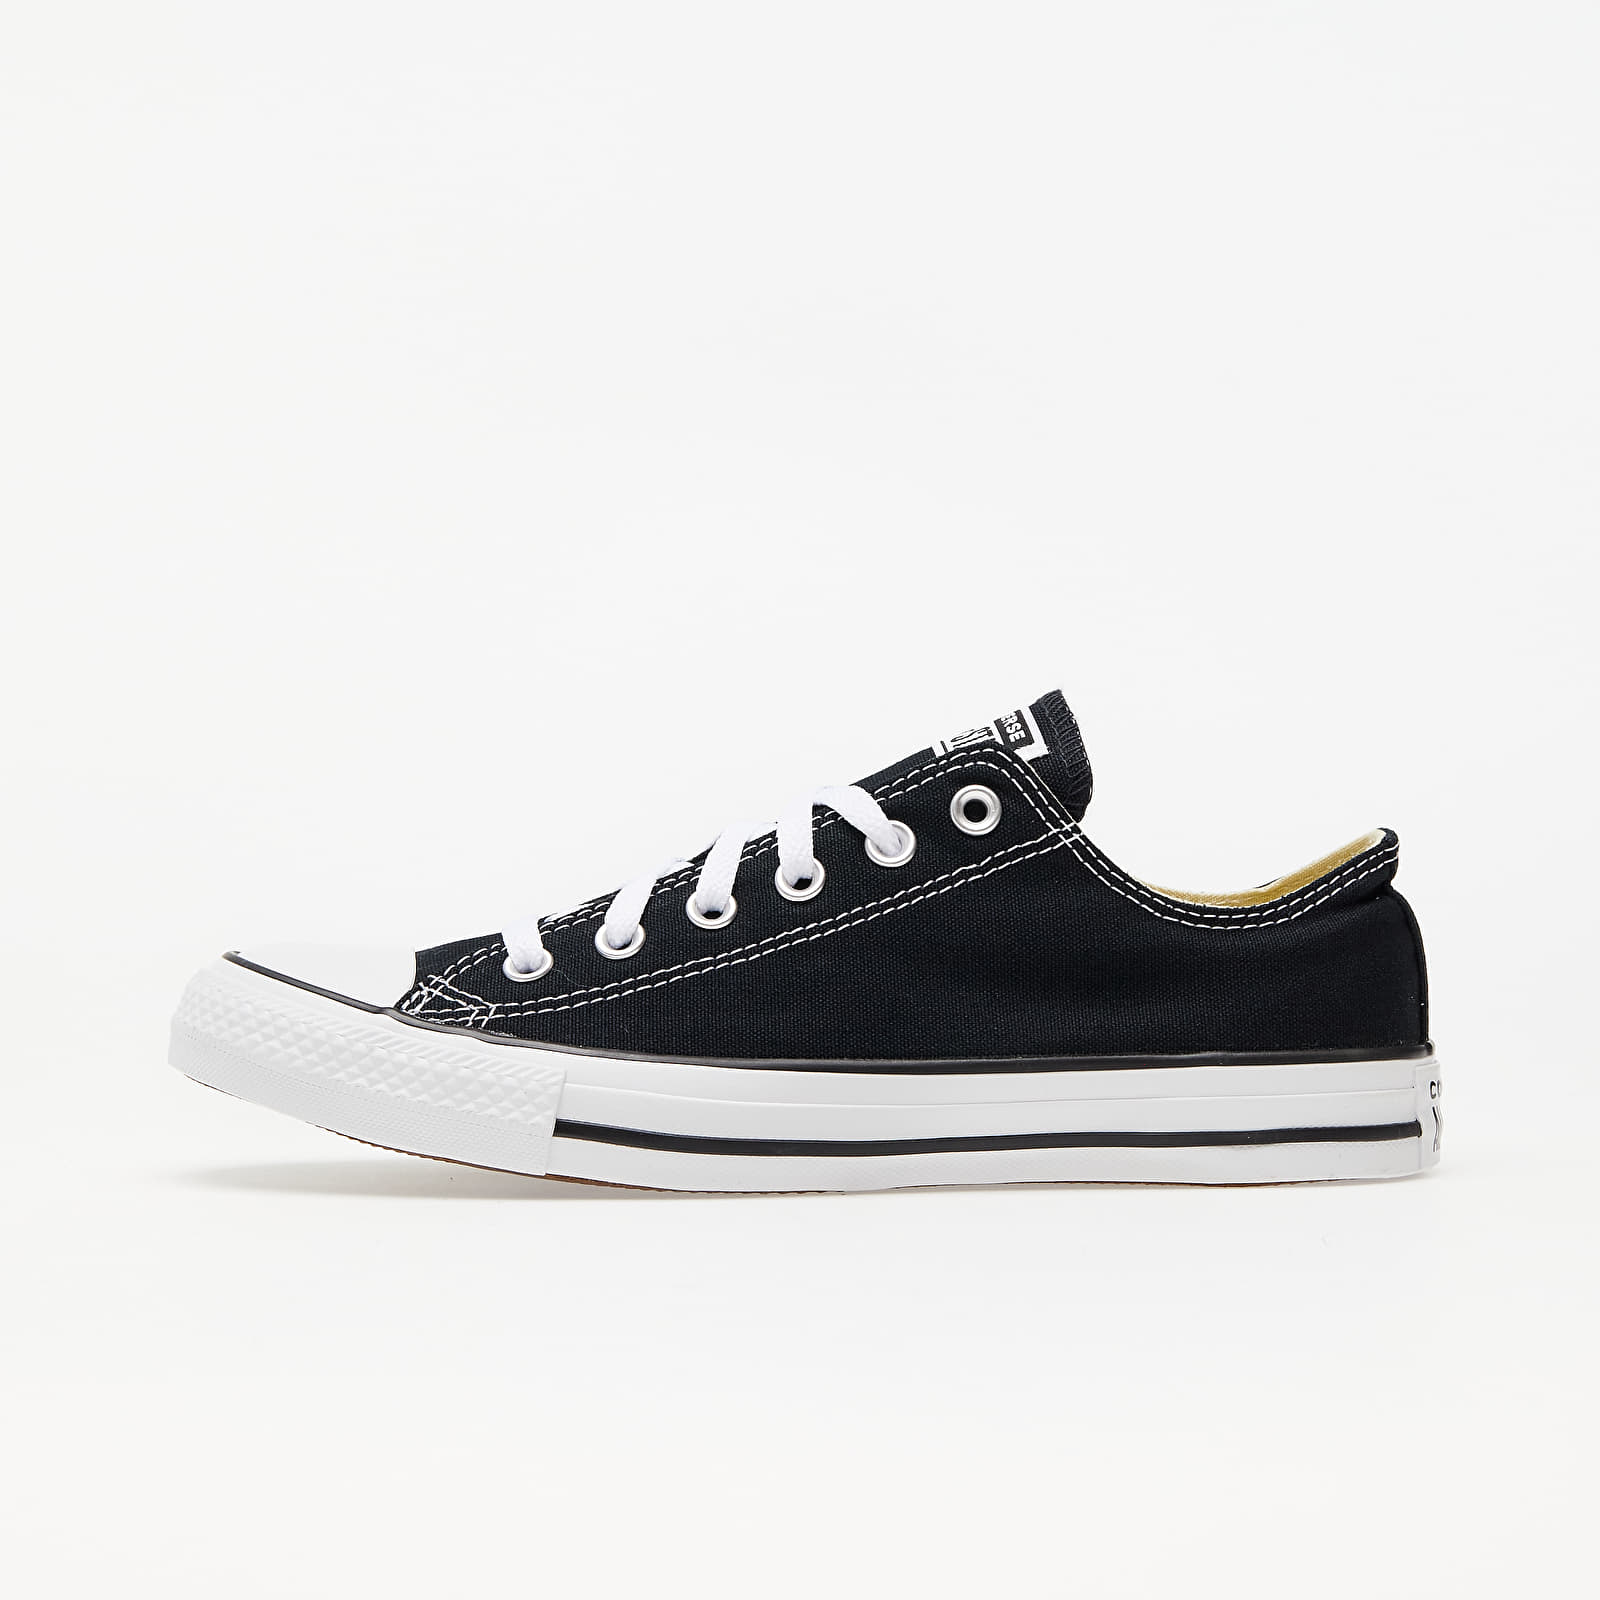 Men's shoes Converse All Star Low Trainers - Black